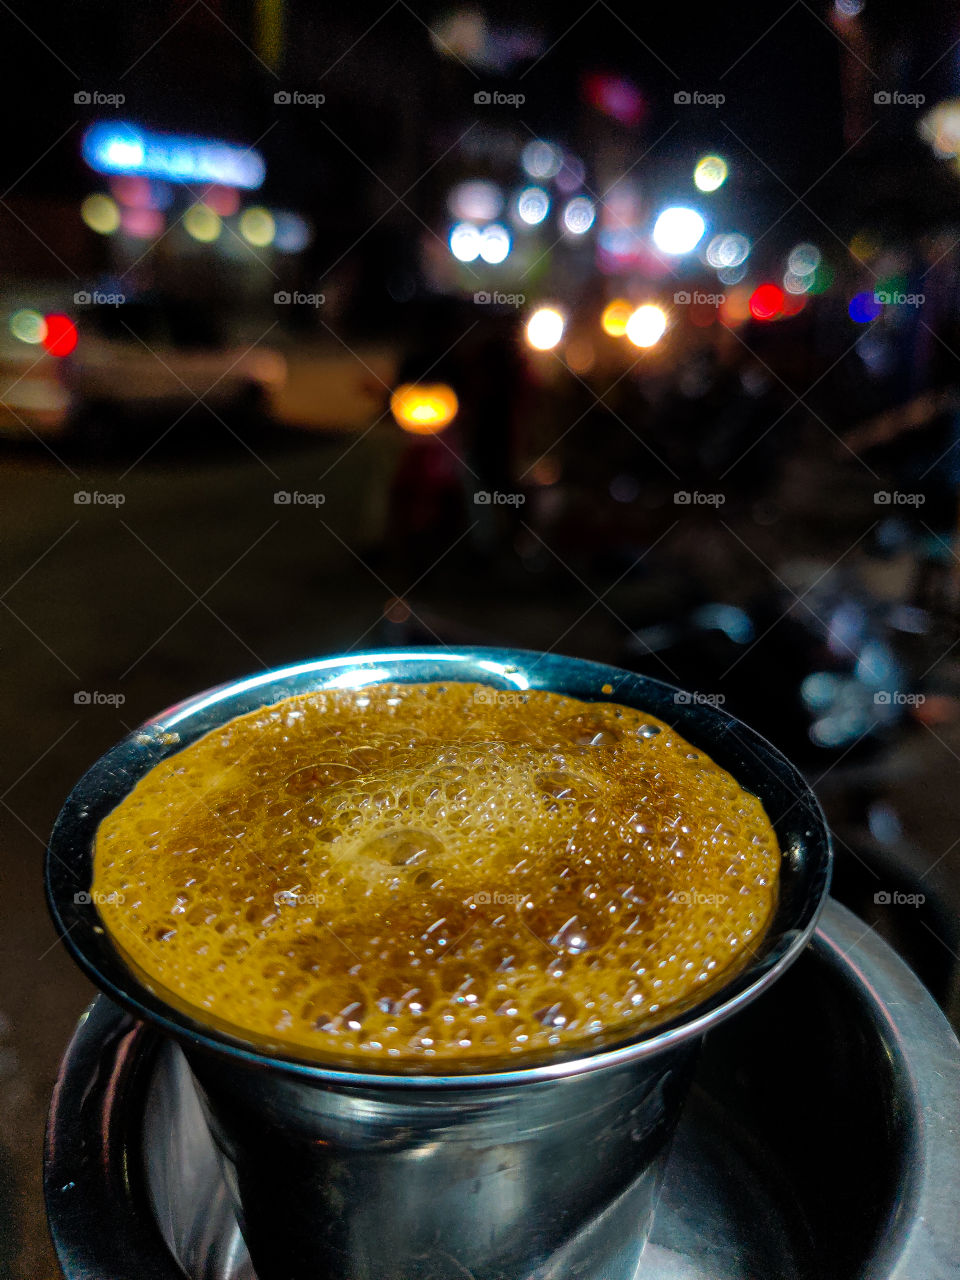 A typical Indian filter coffee.. Simple but tasty